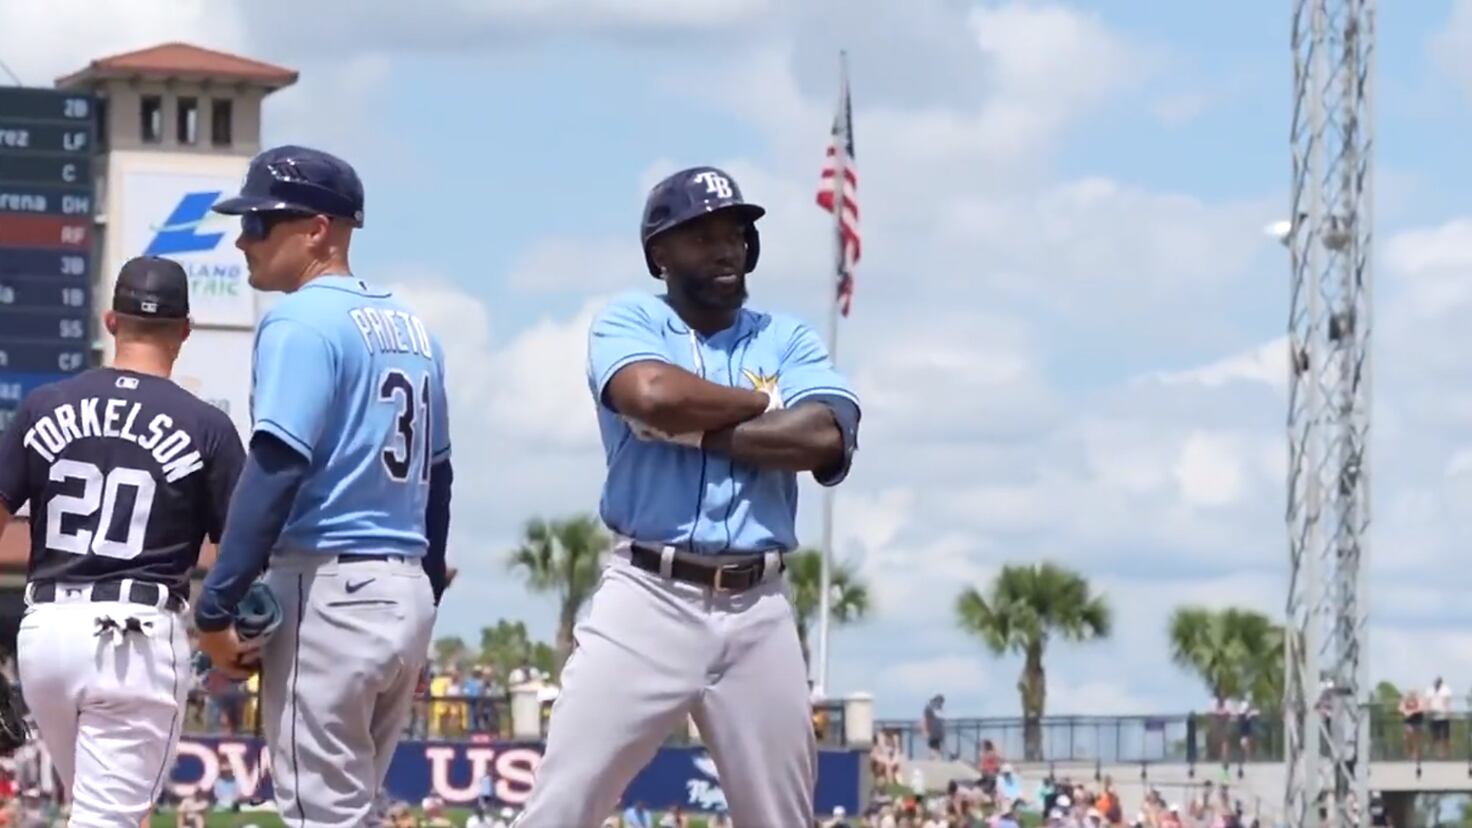 Rays blank Tigers 4-0 on opening day